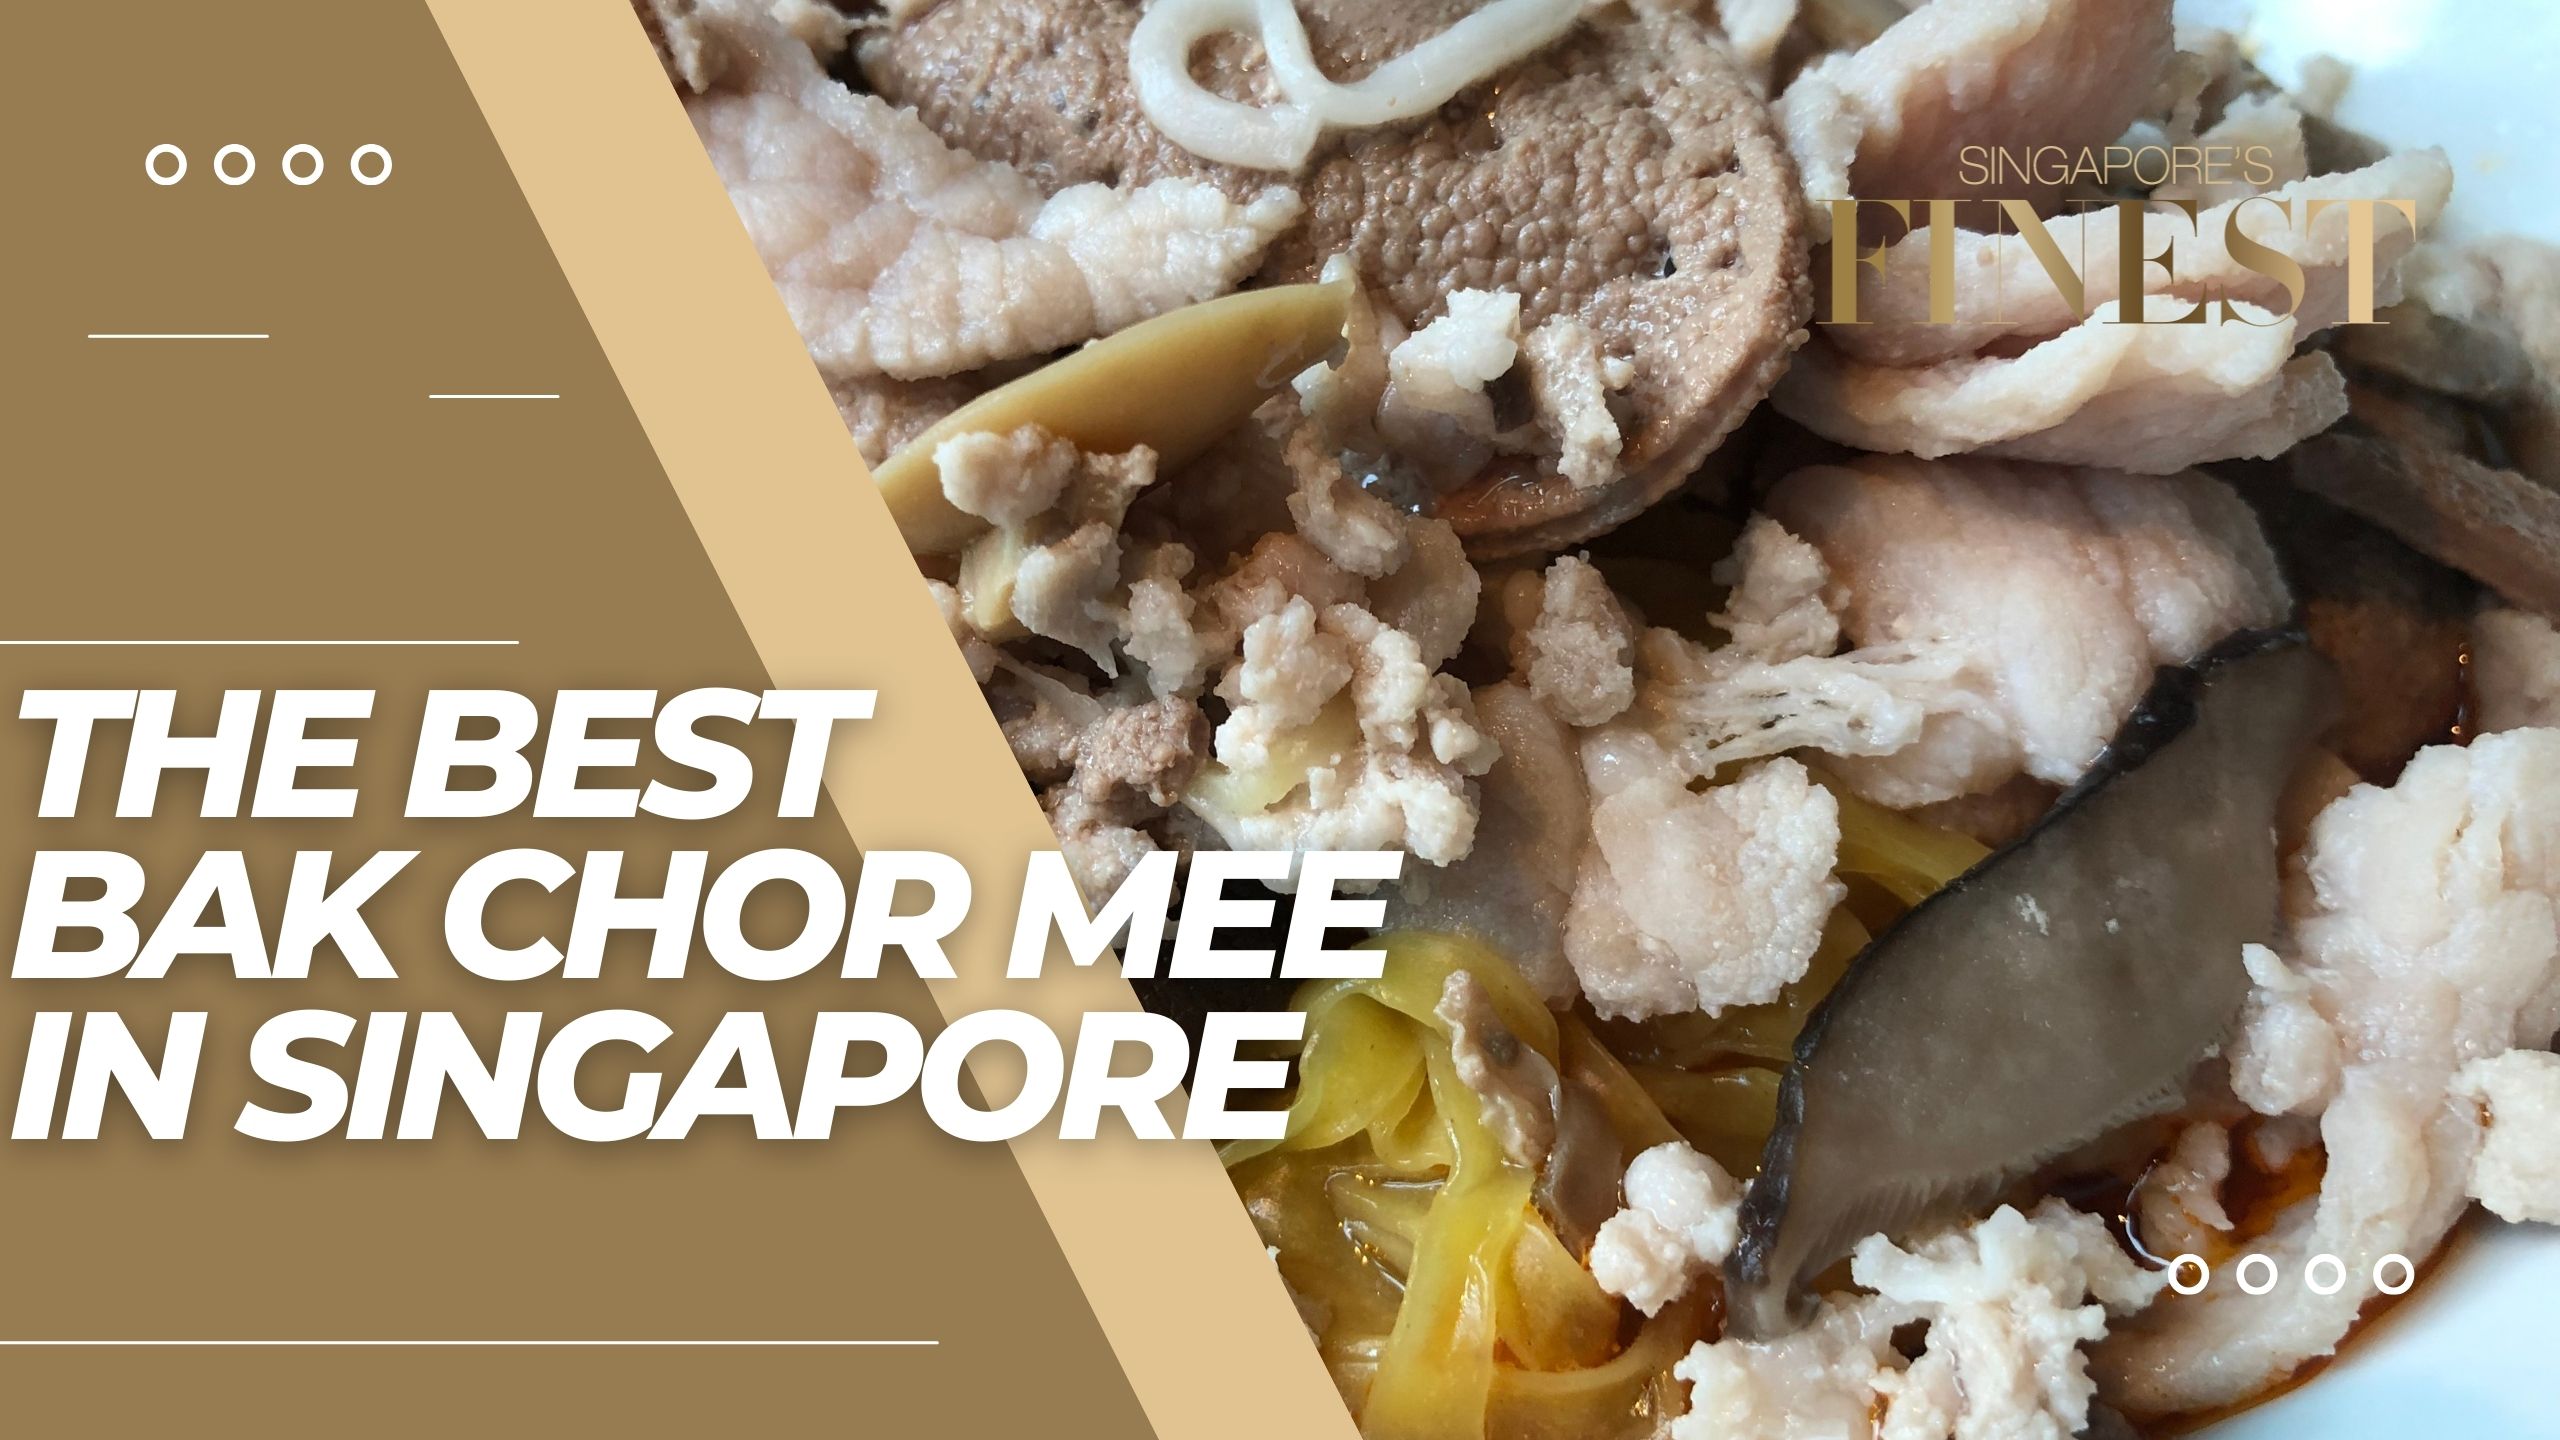 The Finest Bak Chor Mee in Singapore